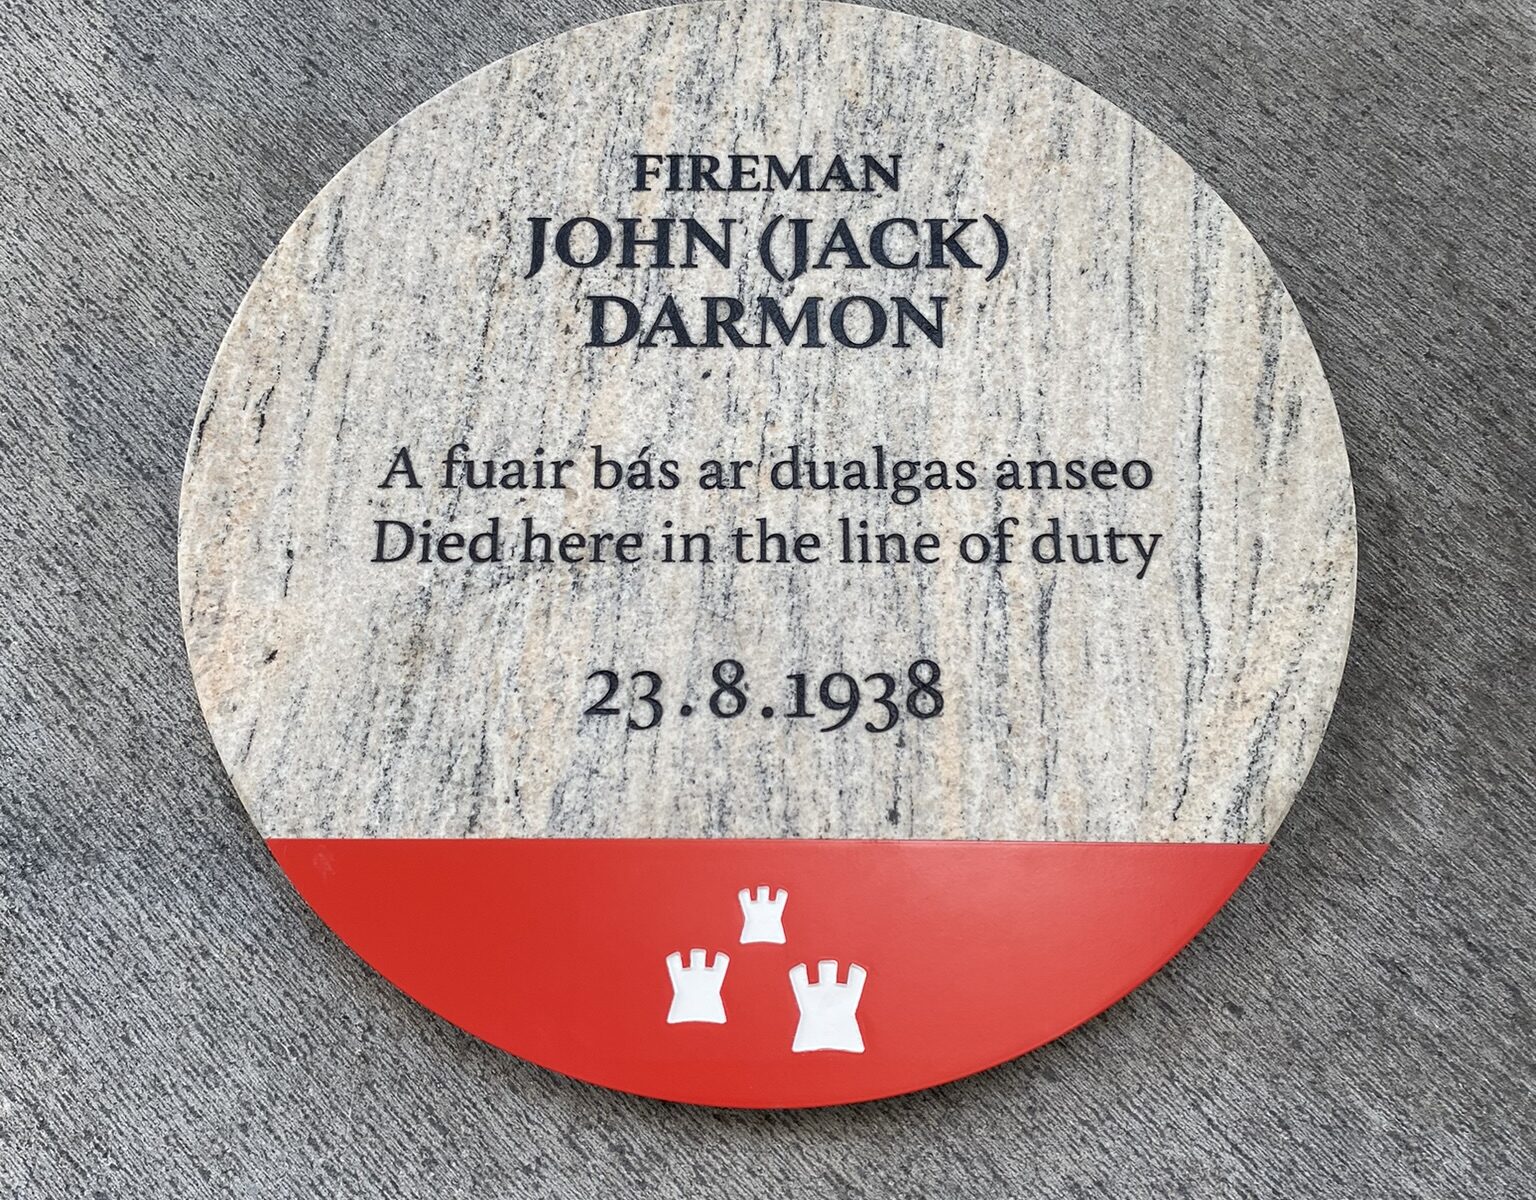 Photograph of a commemorative plaque with black text on grey granite with the Dublin City Council logo at the bottom in white on a red background.